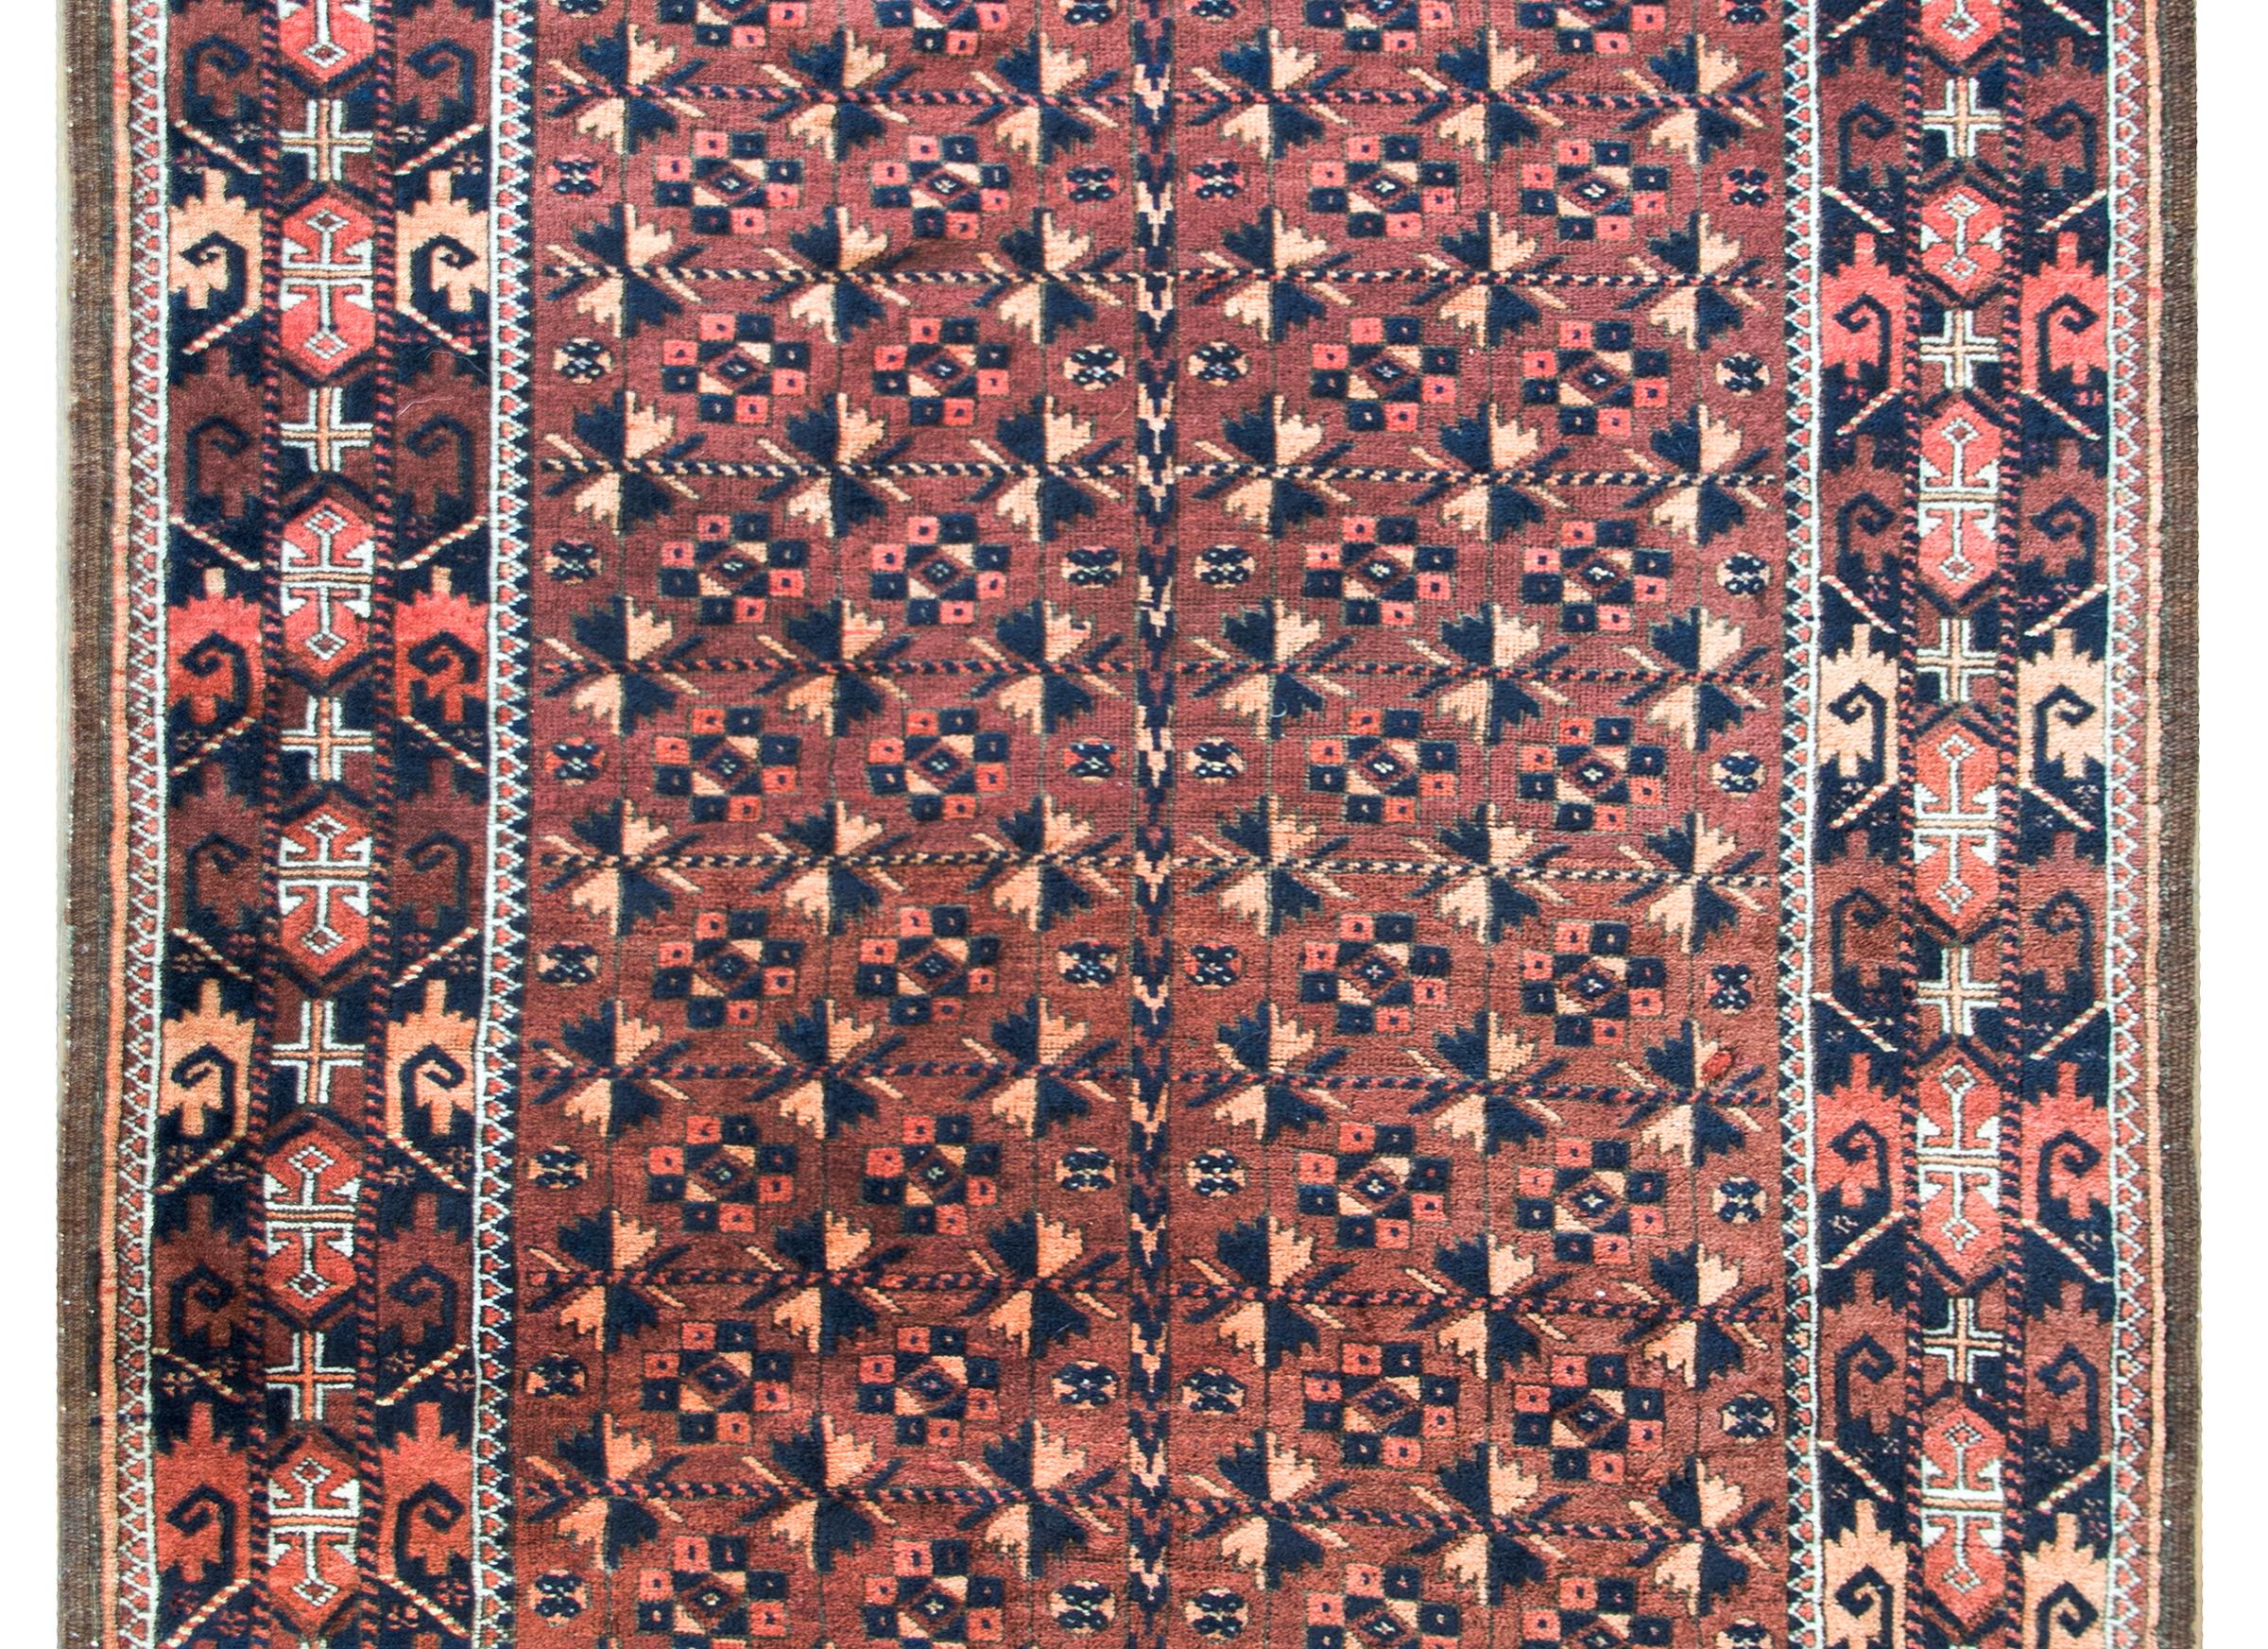 A beautiful early 20th century Persian Baluch rug with an all-over stylized flower pattern woven in red, orange, and black wool, set against a brown background.  The border is wonderful with even more stylized flowers and leaves woven in similar